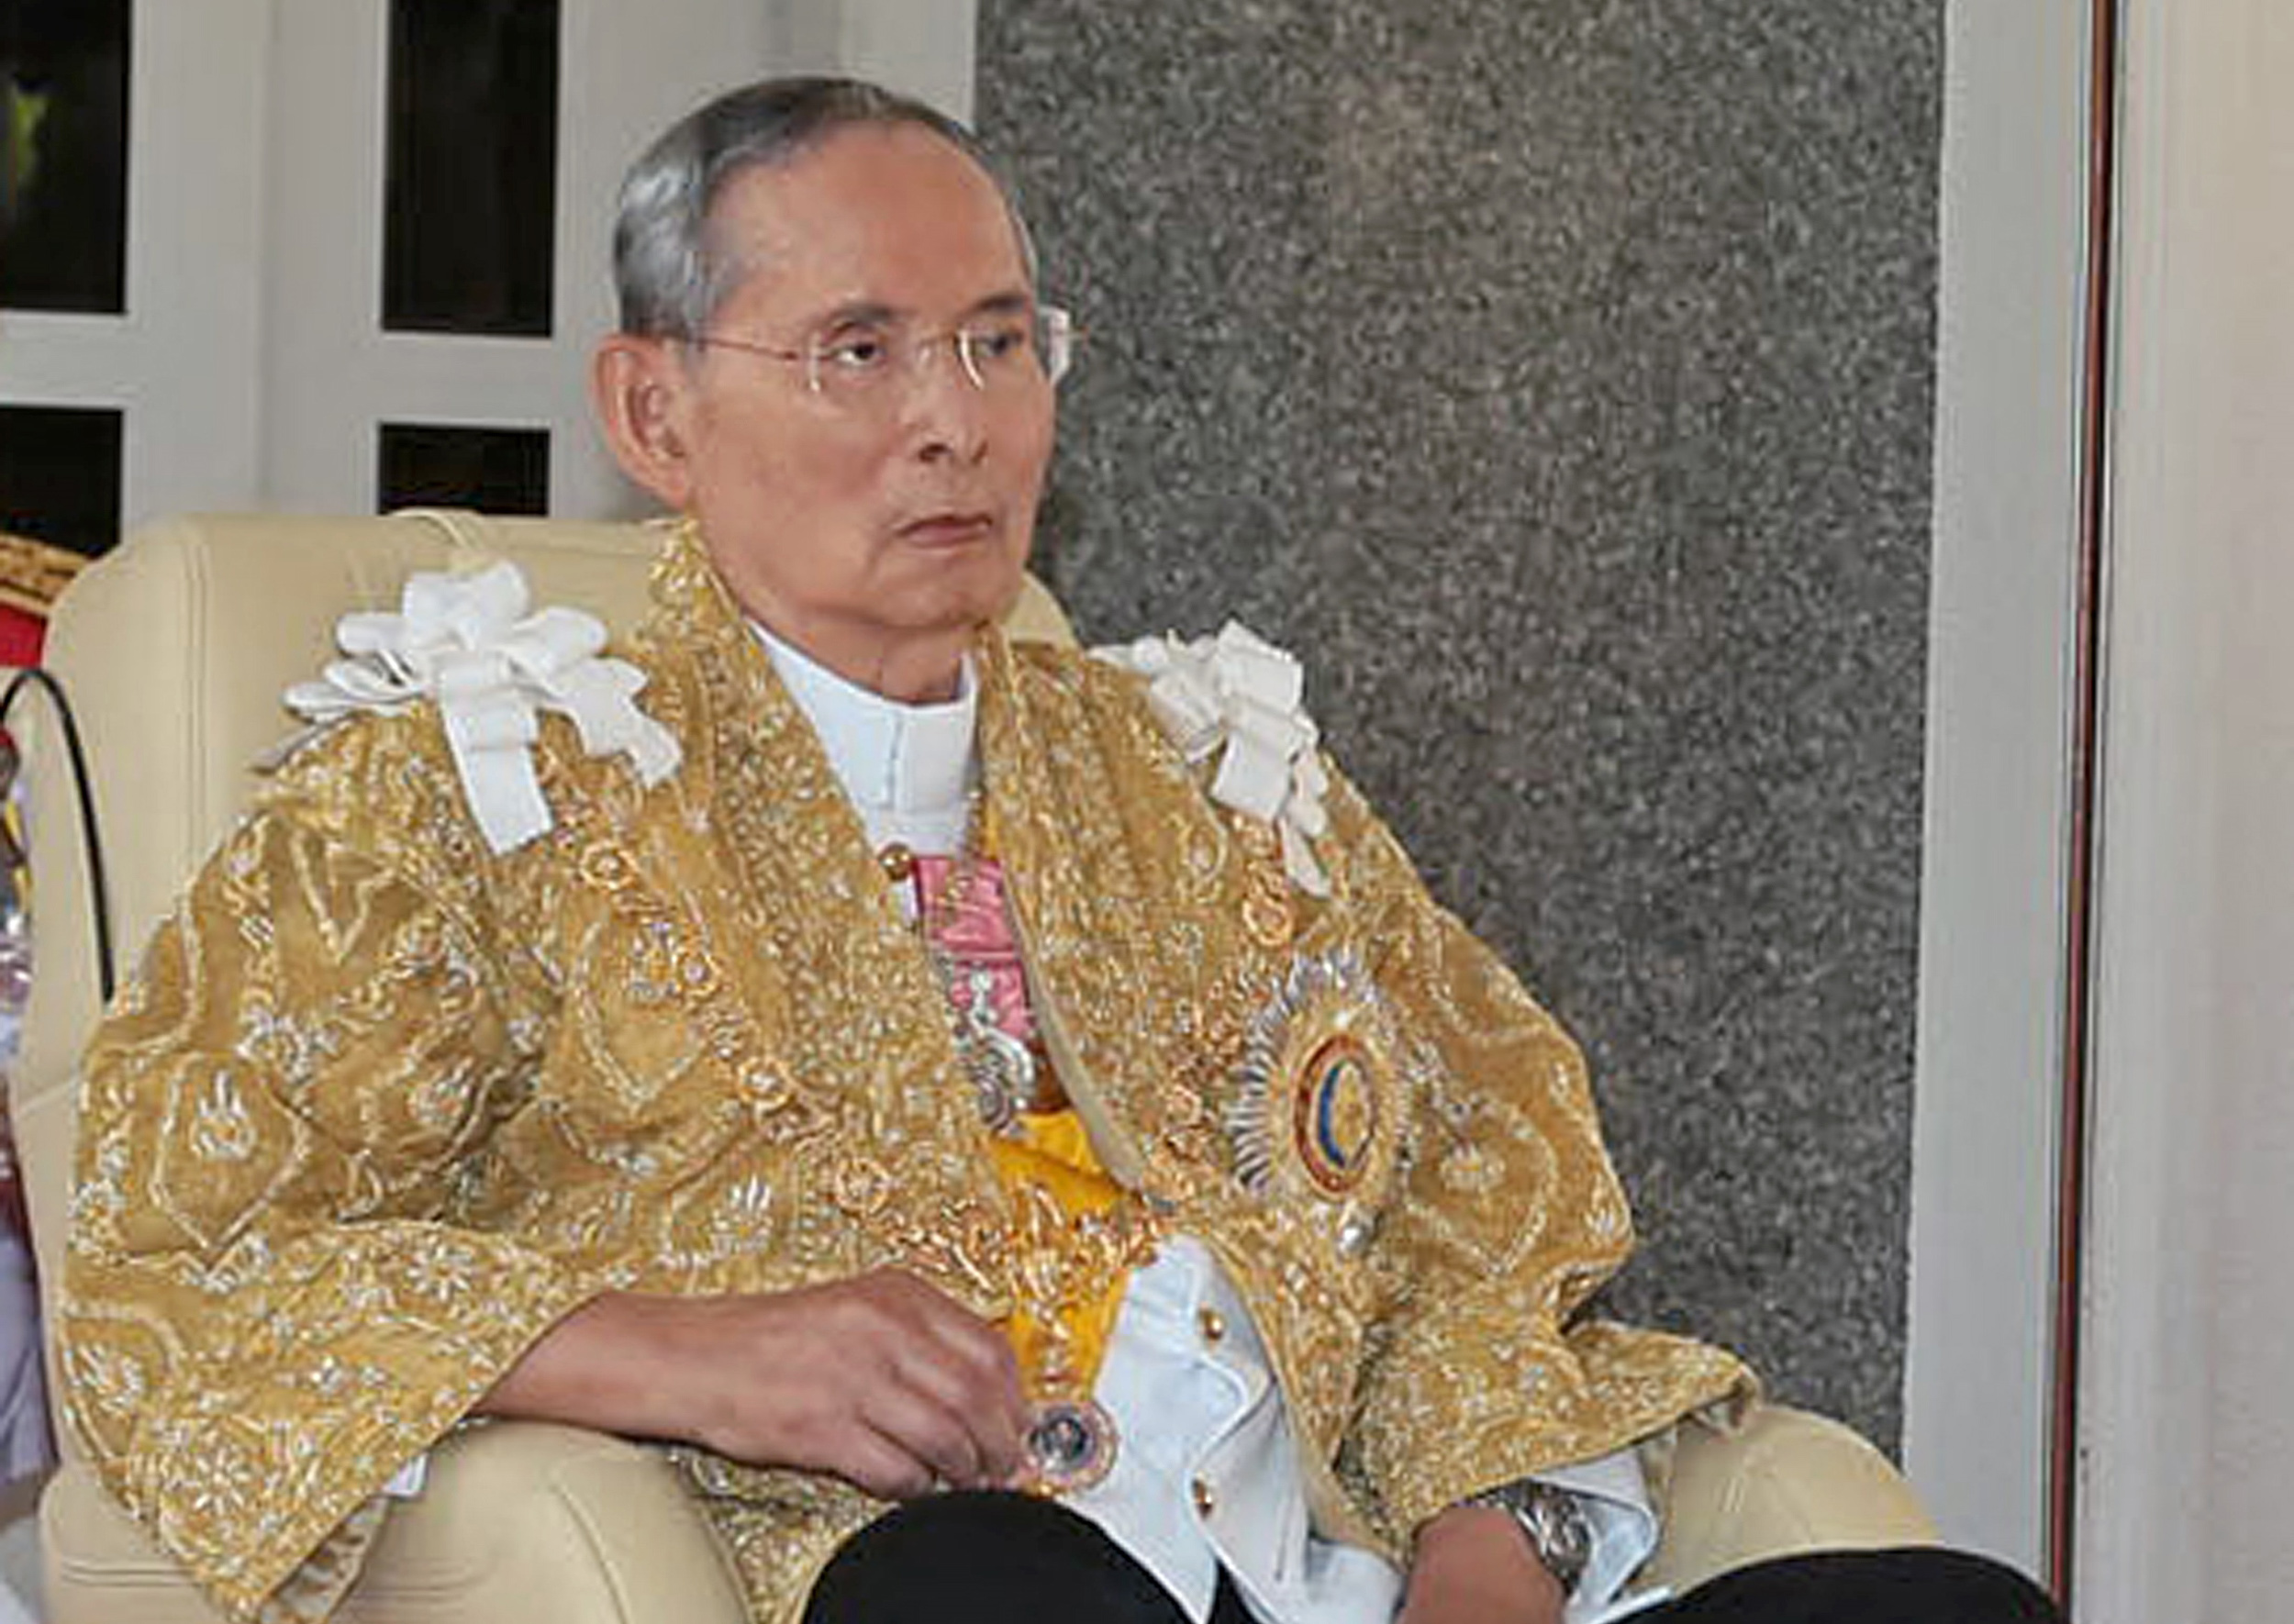 This handout photo taken on December 5, 2013 by the Thai Royal Bureau shows Thai King Bhumibol Adulyadej sitting in a wheelchair at the Rajapracha Samakhom Pavillion of Klai Kanwon Palace in Hua Hin resort. Thailand's revered King Bhumibol Adulyadej urged the nation to work together for "stability" in a speech on his 86th birthday, marked by an easing of tensions after violent anti-government protests. AFP PHOTO / Thai Royal Bureau   -----EDITORS NOTE---- RESTRICTED TO EDITORIAL USE - MANDATORY CREDIT "AFP PHOTO / Thai Royal Bureau" - NO MARKETING NO ADVERTISING CAMPAIGNS - DISTRIBUTED AS A SERVICE TO CLIENTS / AFP PHOTO / Thai Royal Bureau / Thai Royal Bureau